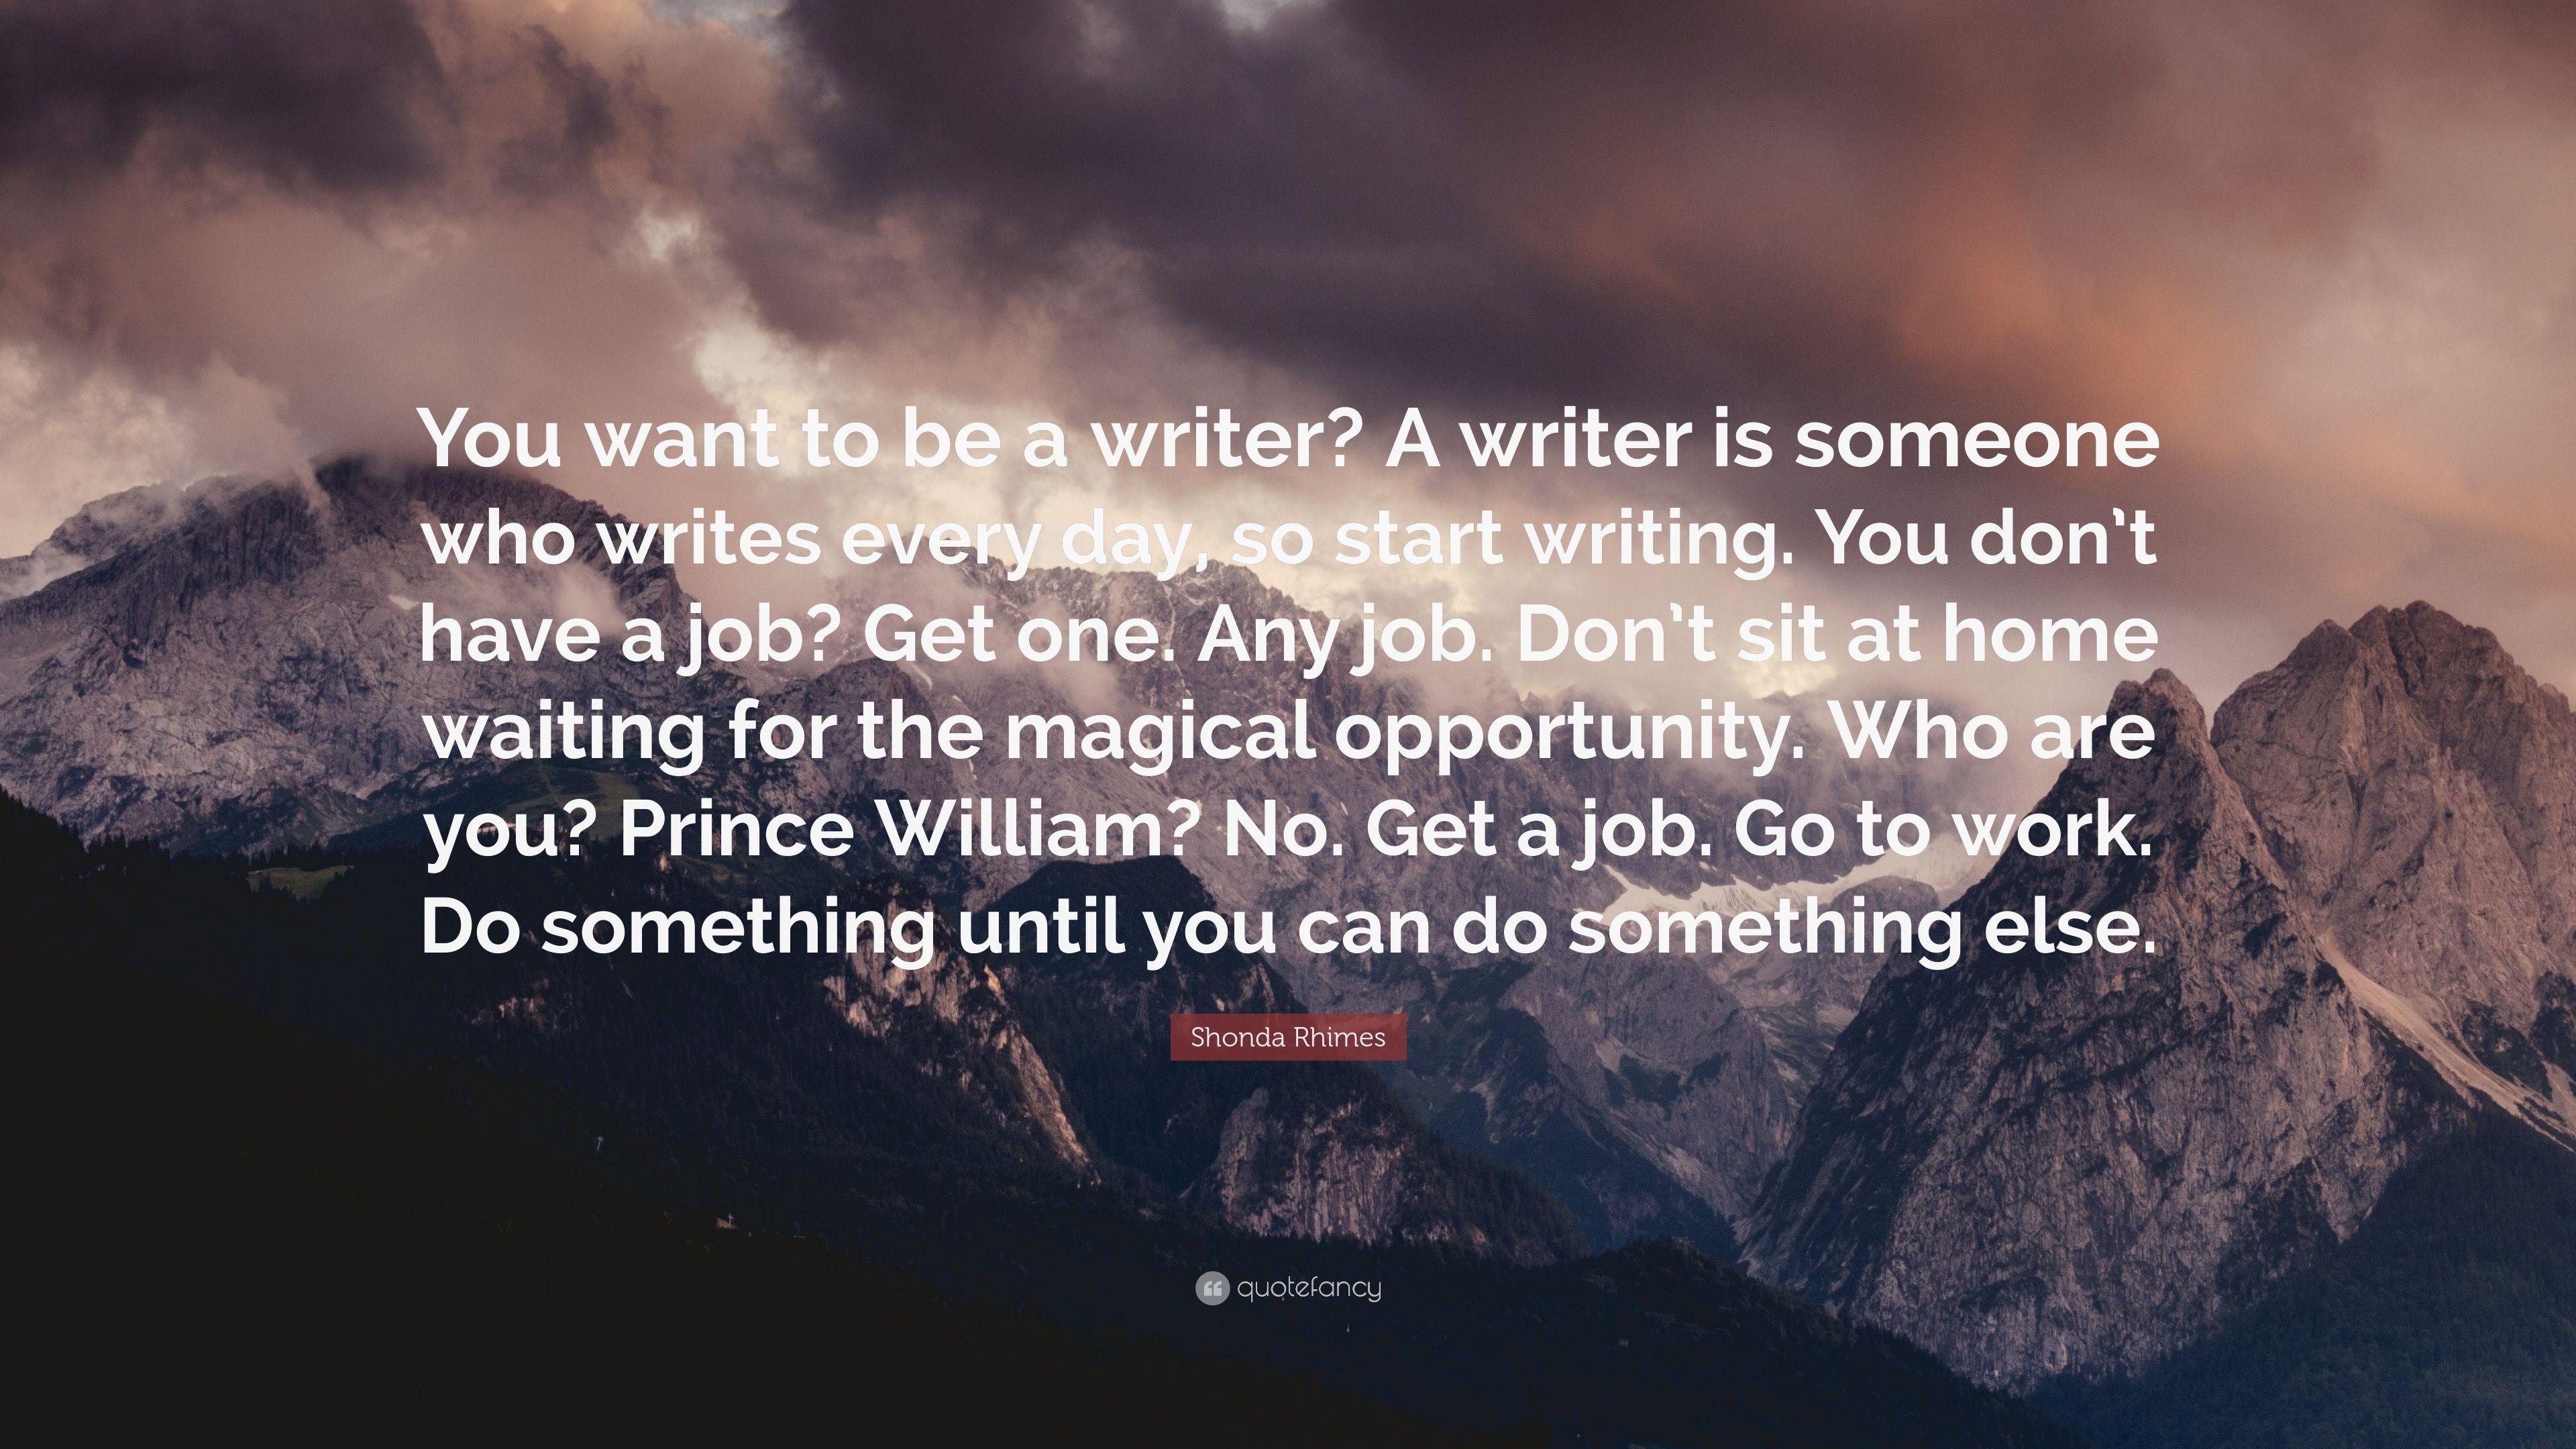 Shonda Rhimes Quote: “You want to be a writer? A writer is someone